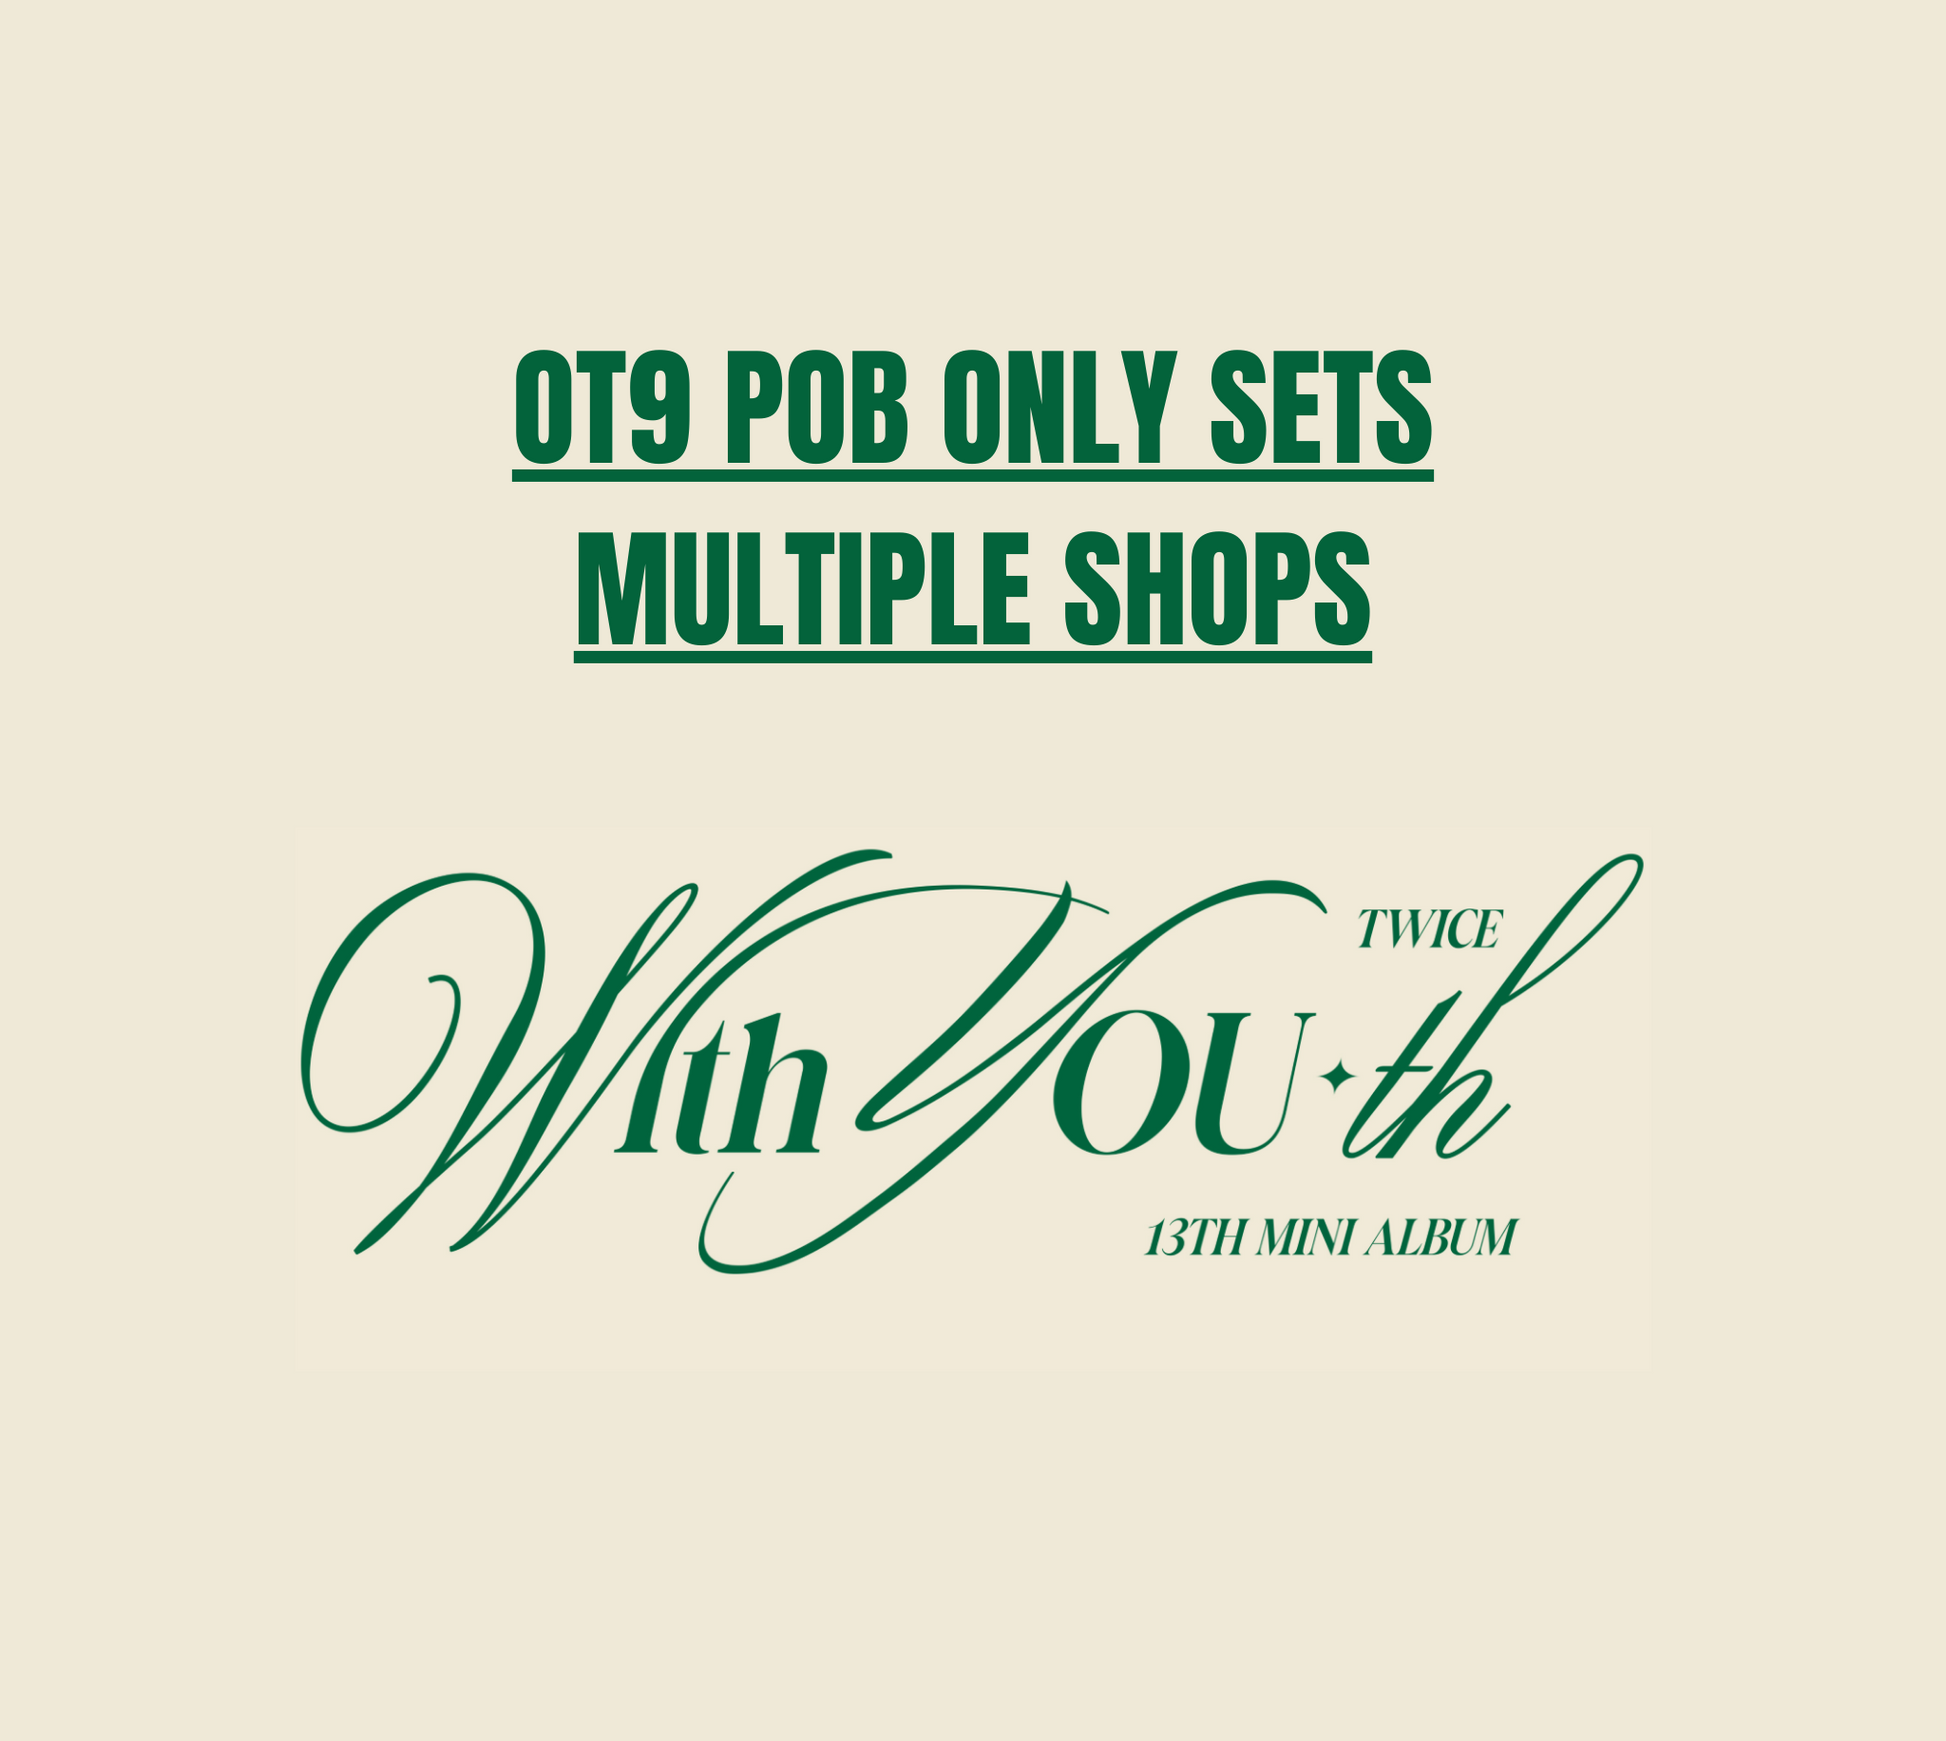 TWICE) - 13TH MINI ALBUM WITH YOUTH: OT9 POB ONLY SETS (Multiple shop –  Mrgshop